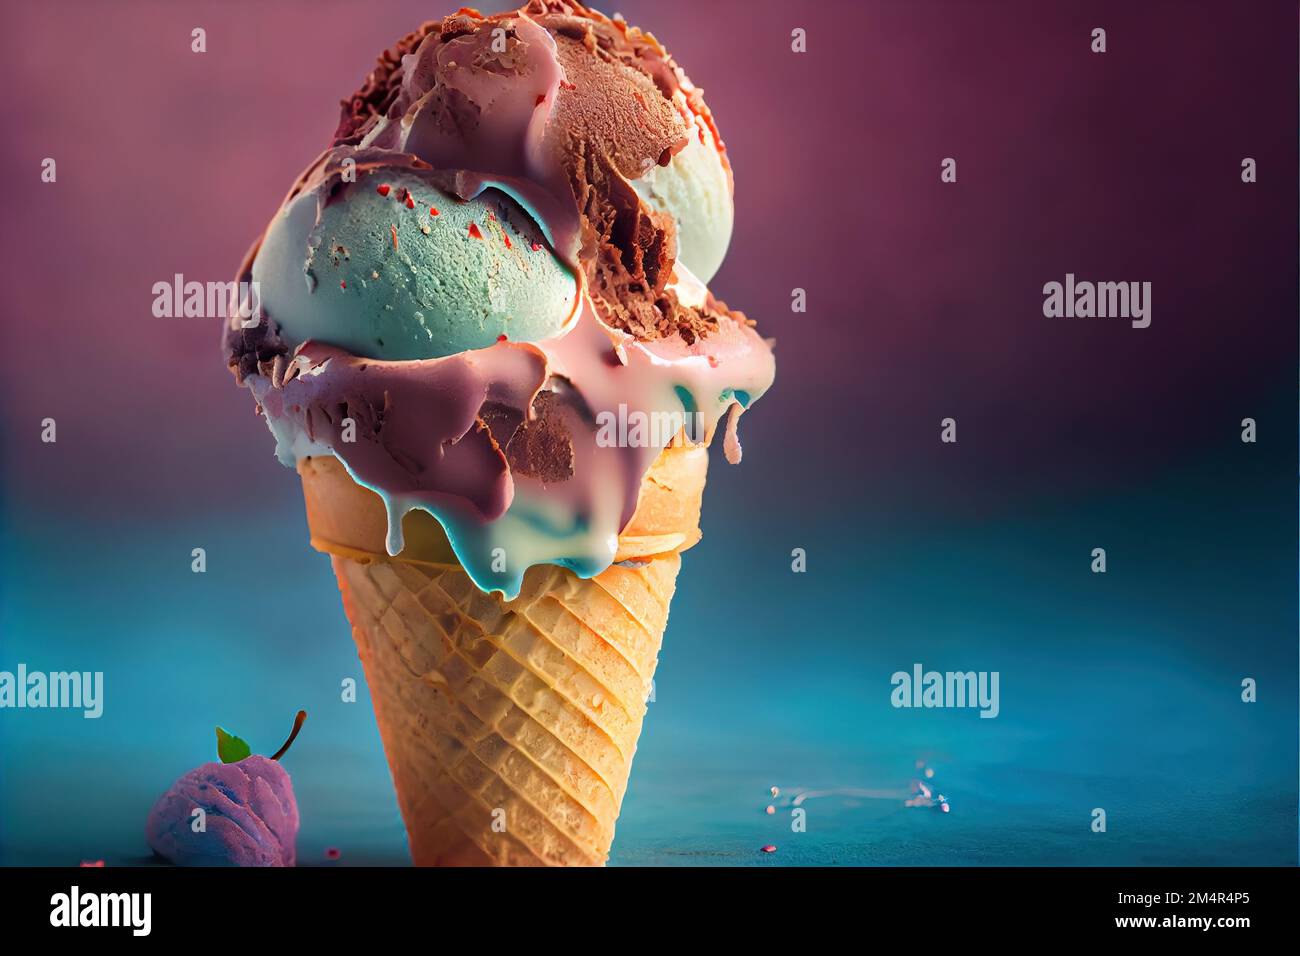 a scoop of ice cream with chocolate and mint on top of it and a cherry on the side of the ice cream cone. . Stock Photo